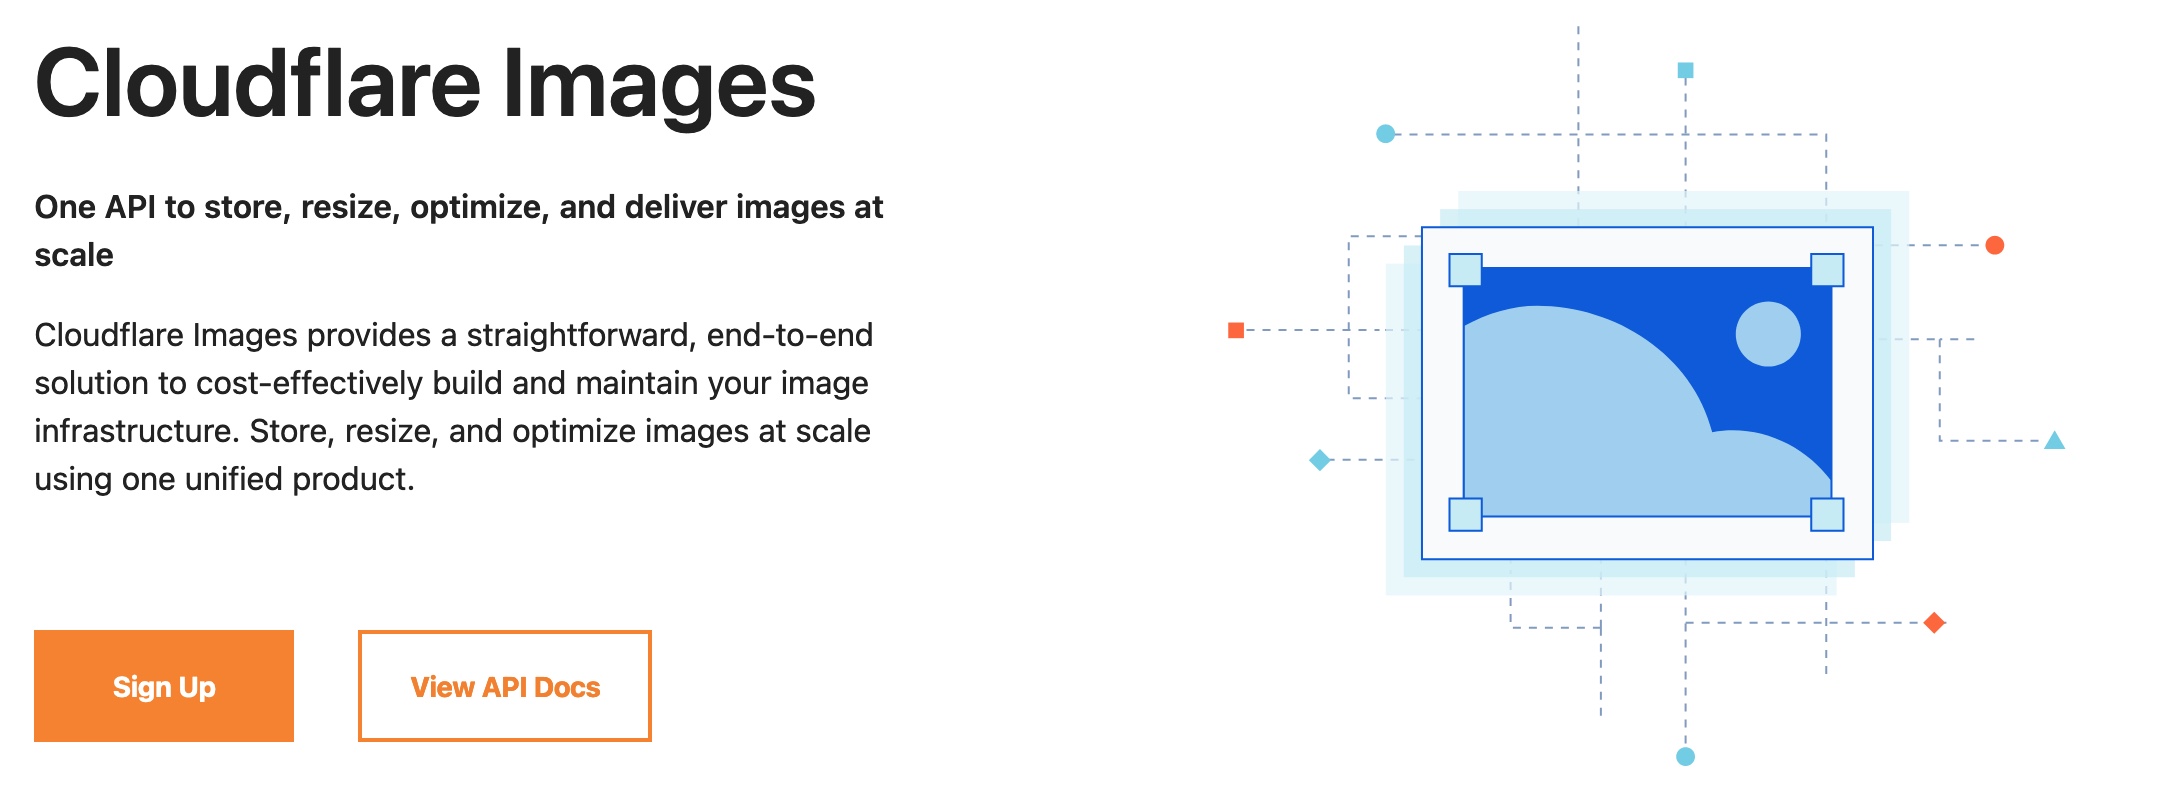 Information about cloudflare's 'image' offering